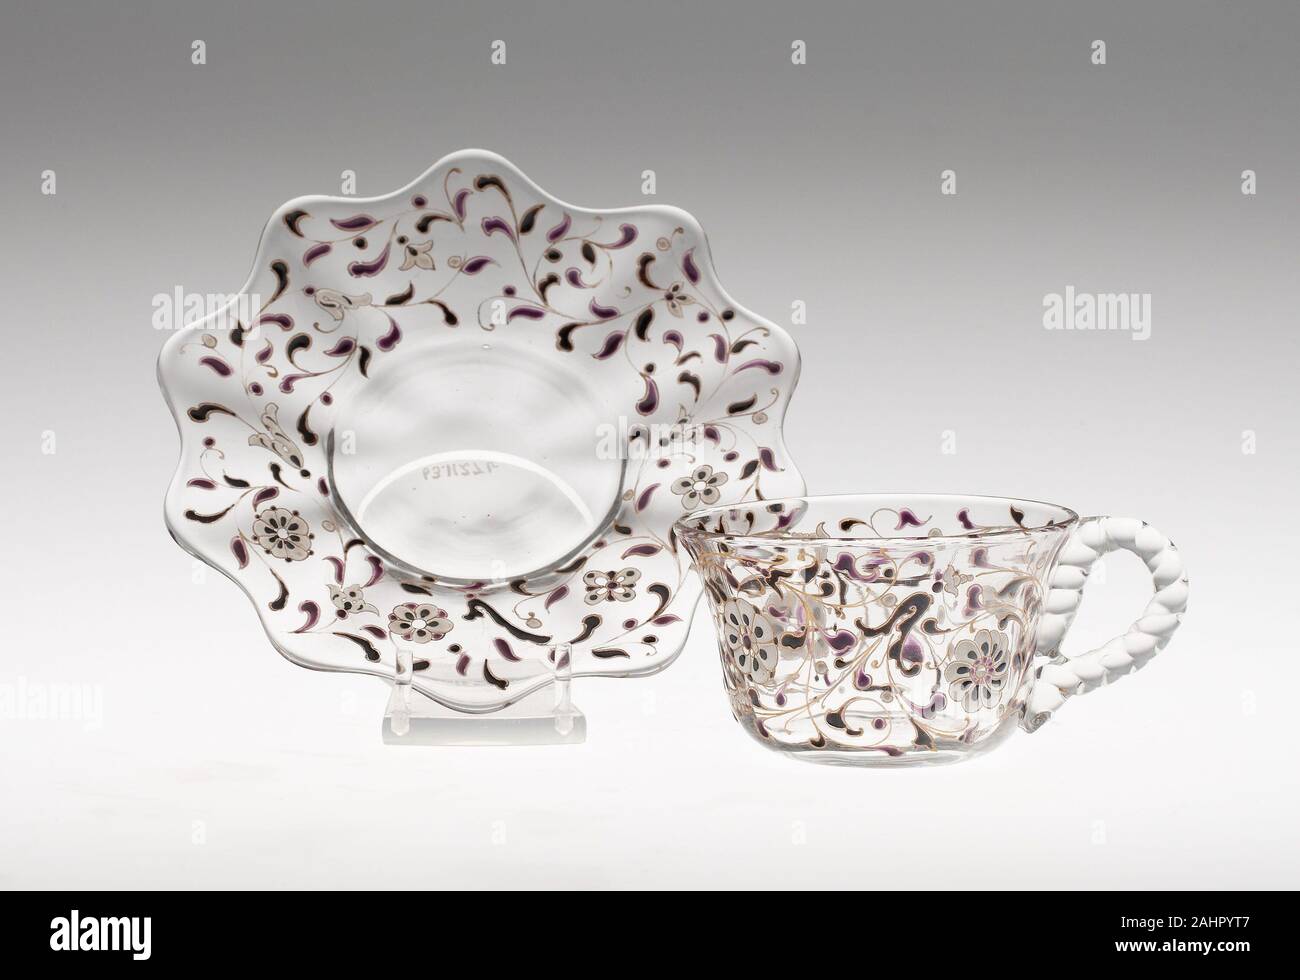 https://c8.alamy.com/comp/2AHPYT7/mile-gall-maker-cup-18951905-nancy-glass-with-enamels-and-gilding-2AHPYT7.jpg